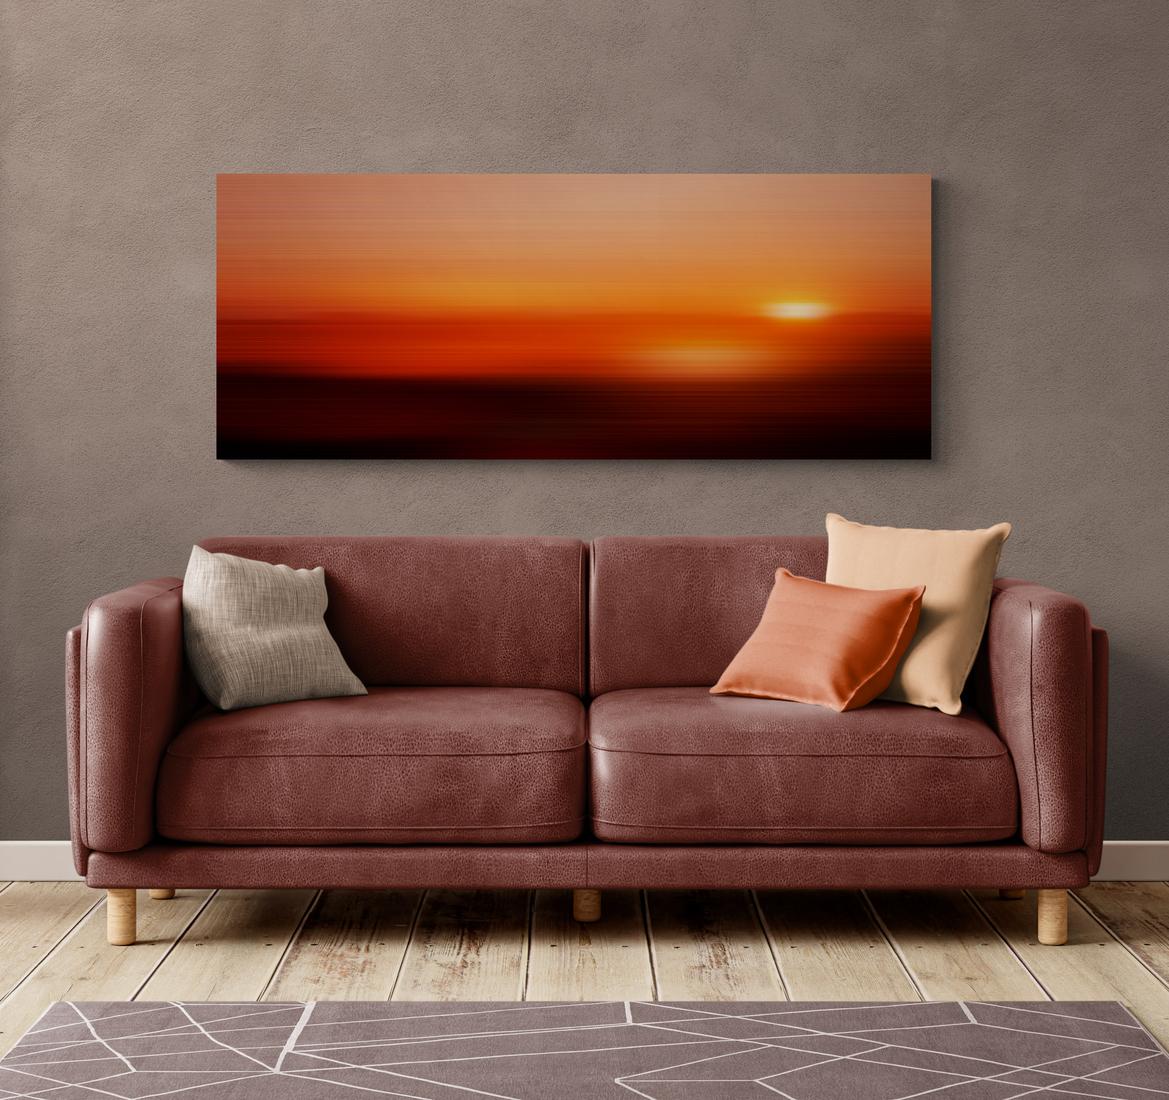 Day - red, orange, sunrise, dawn, abstracted landscape, photography on dibond - Contemporary Photograph by Etienne Labbe